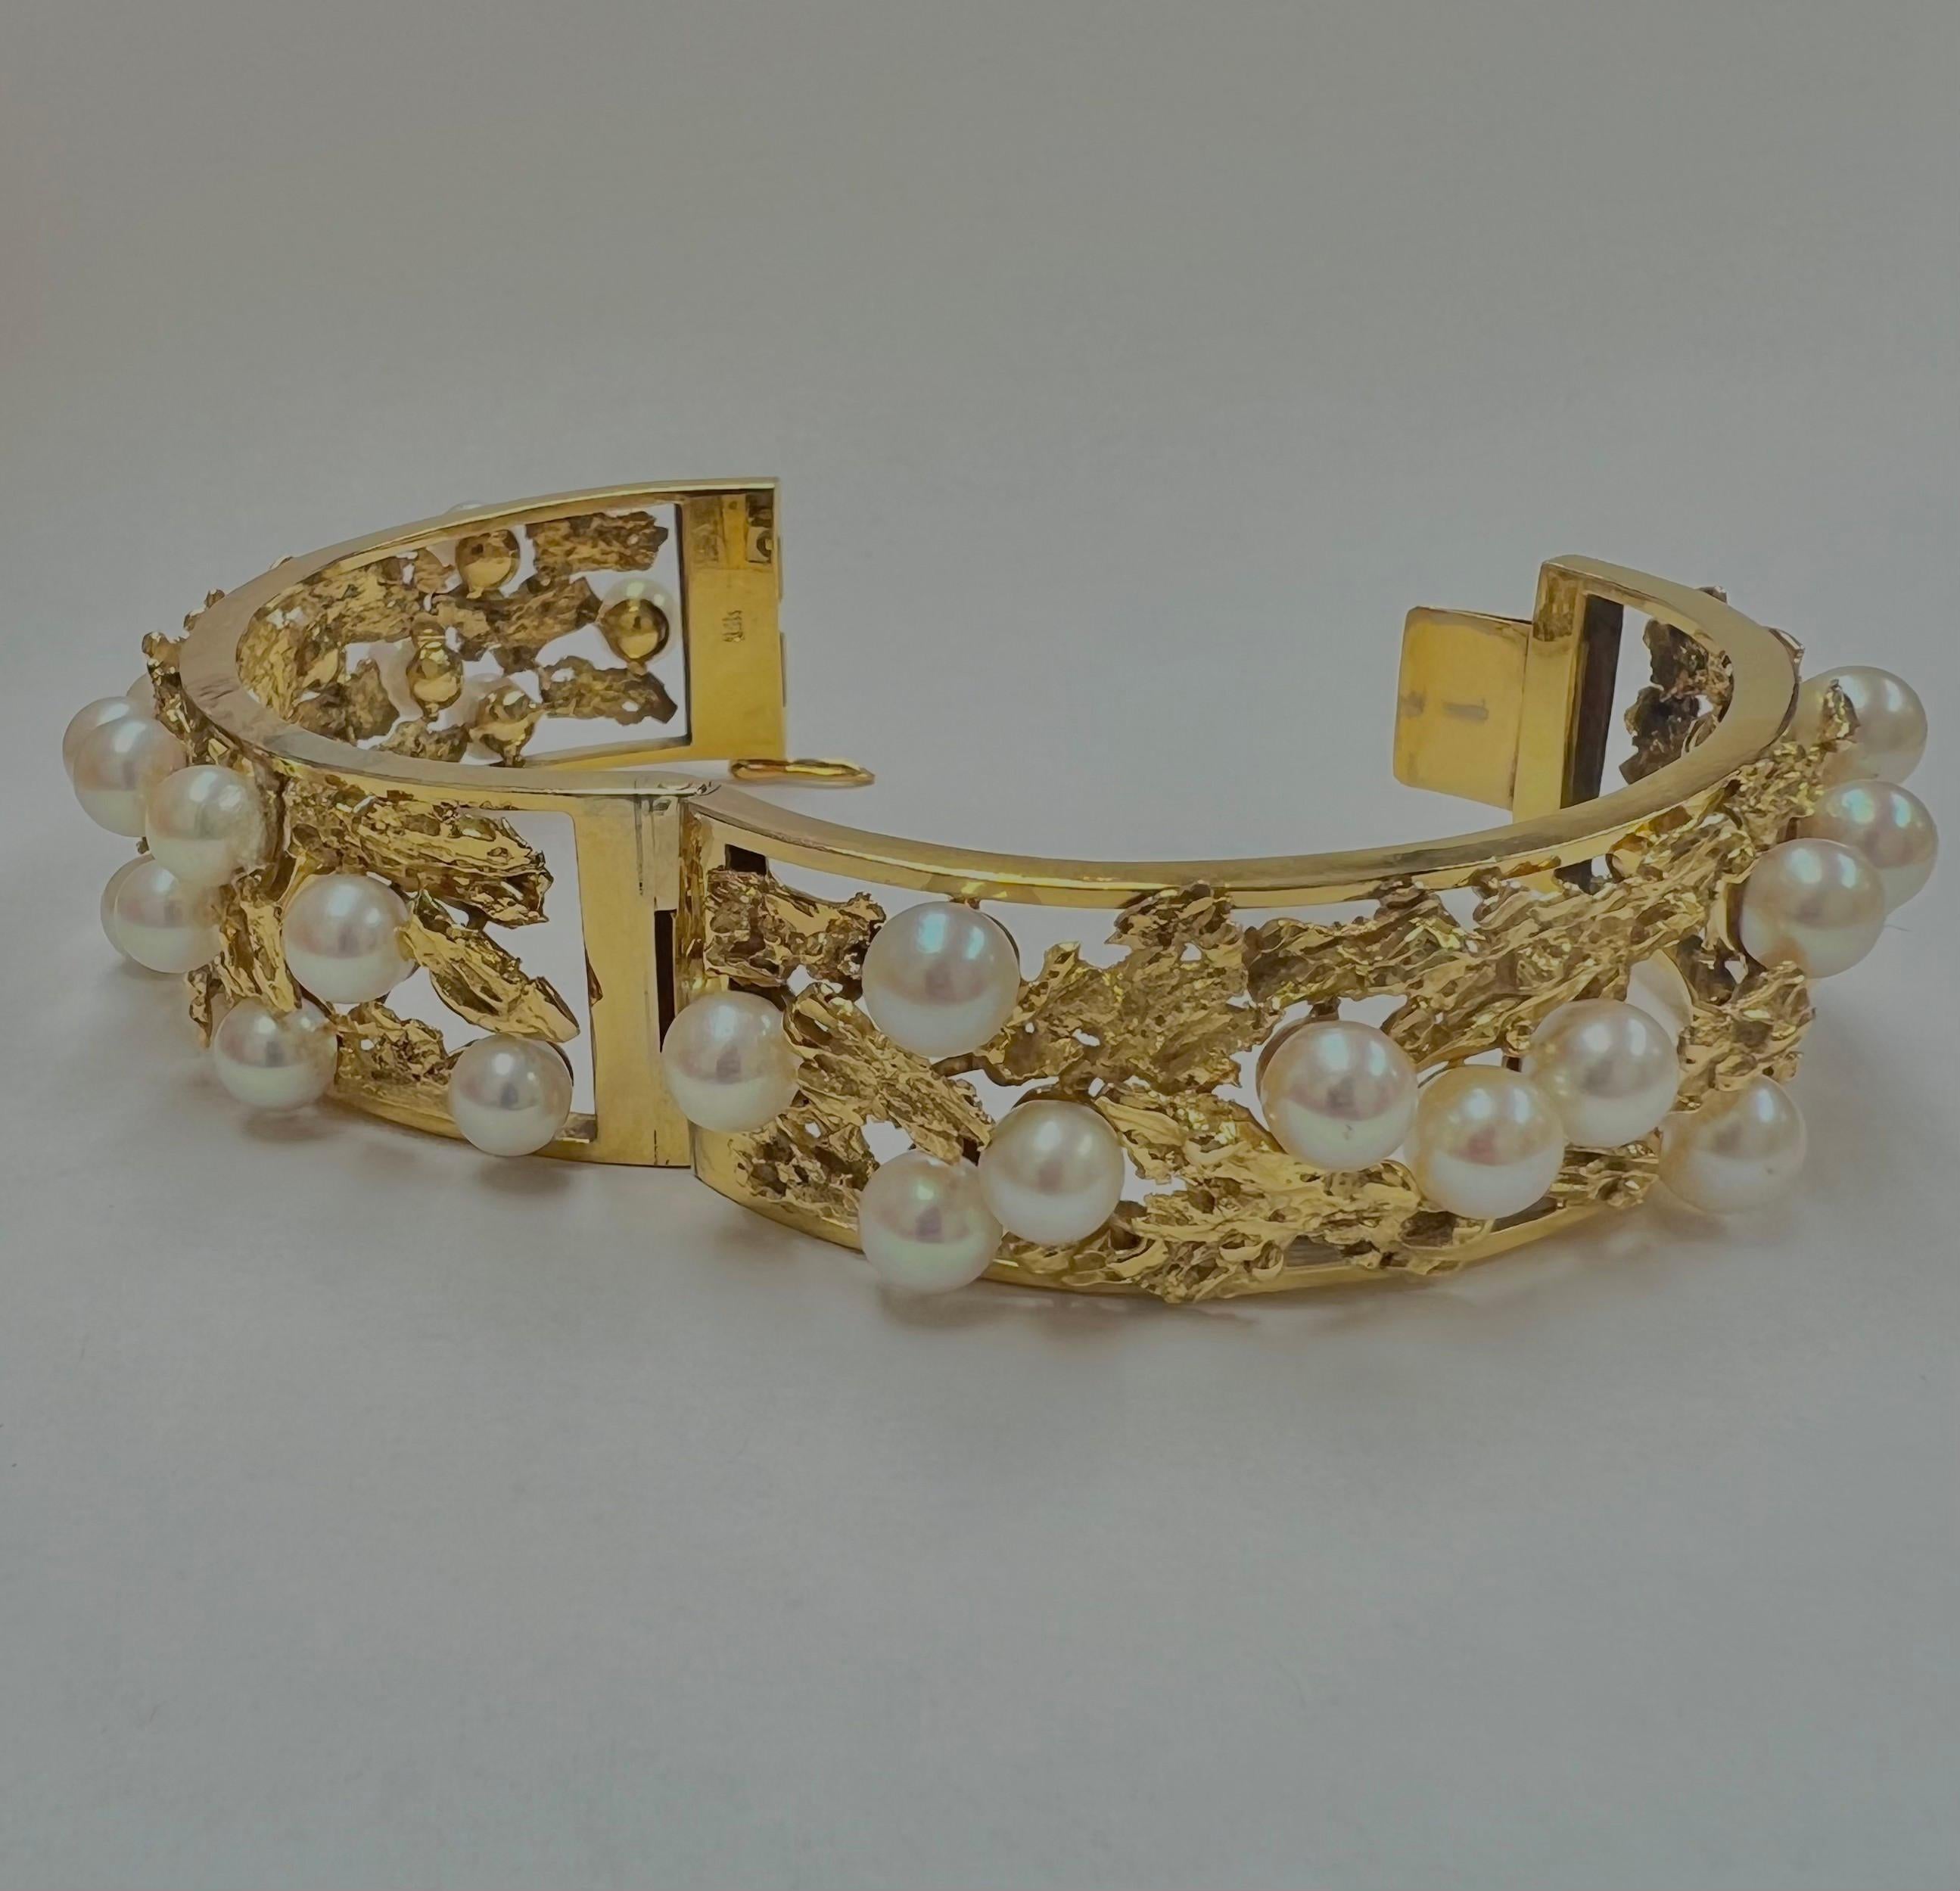 Showcasing a beautiful all natural beautiful Pearl Bangle. This is a staple piece in anyone's jewelry collection. It was carefully handmade in Los Angeles California and polished in 14k yellow gold. The bangle features a very unique and pristine